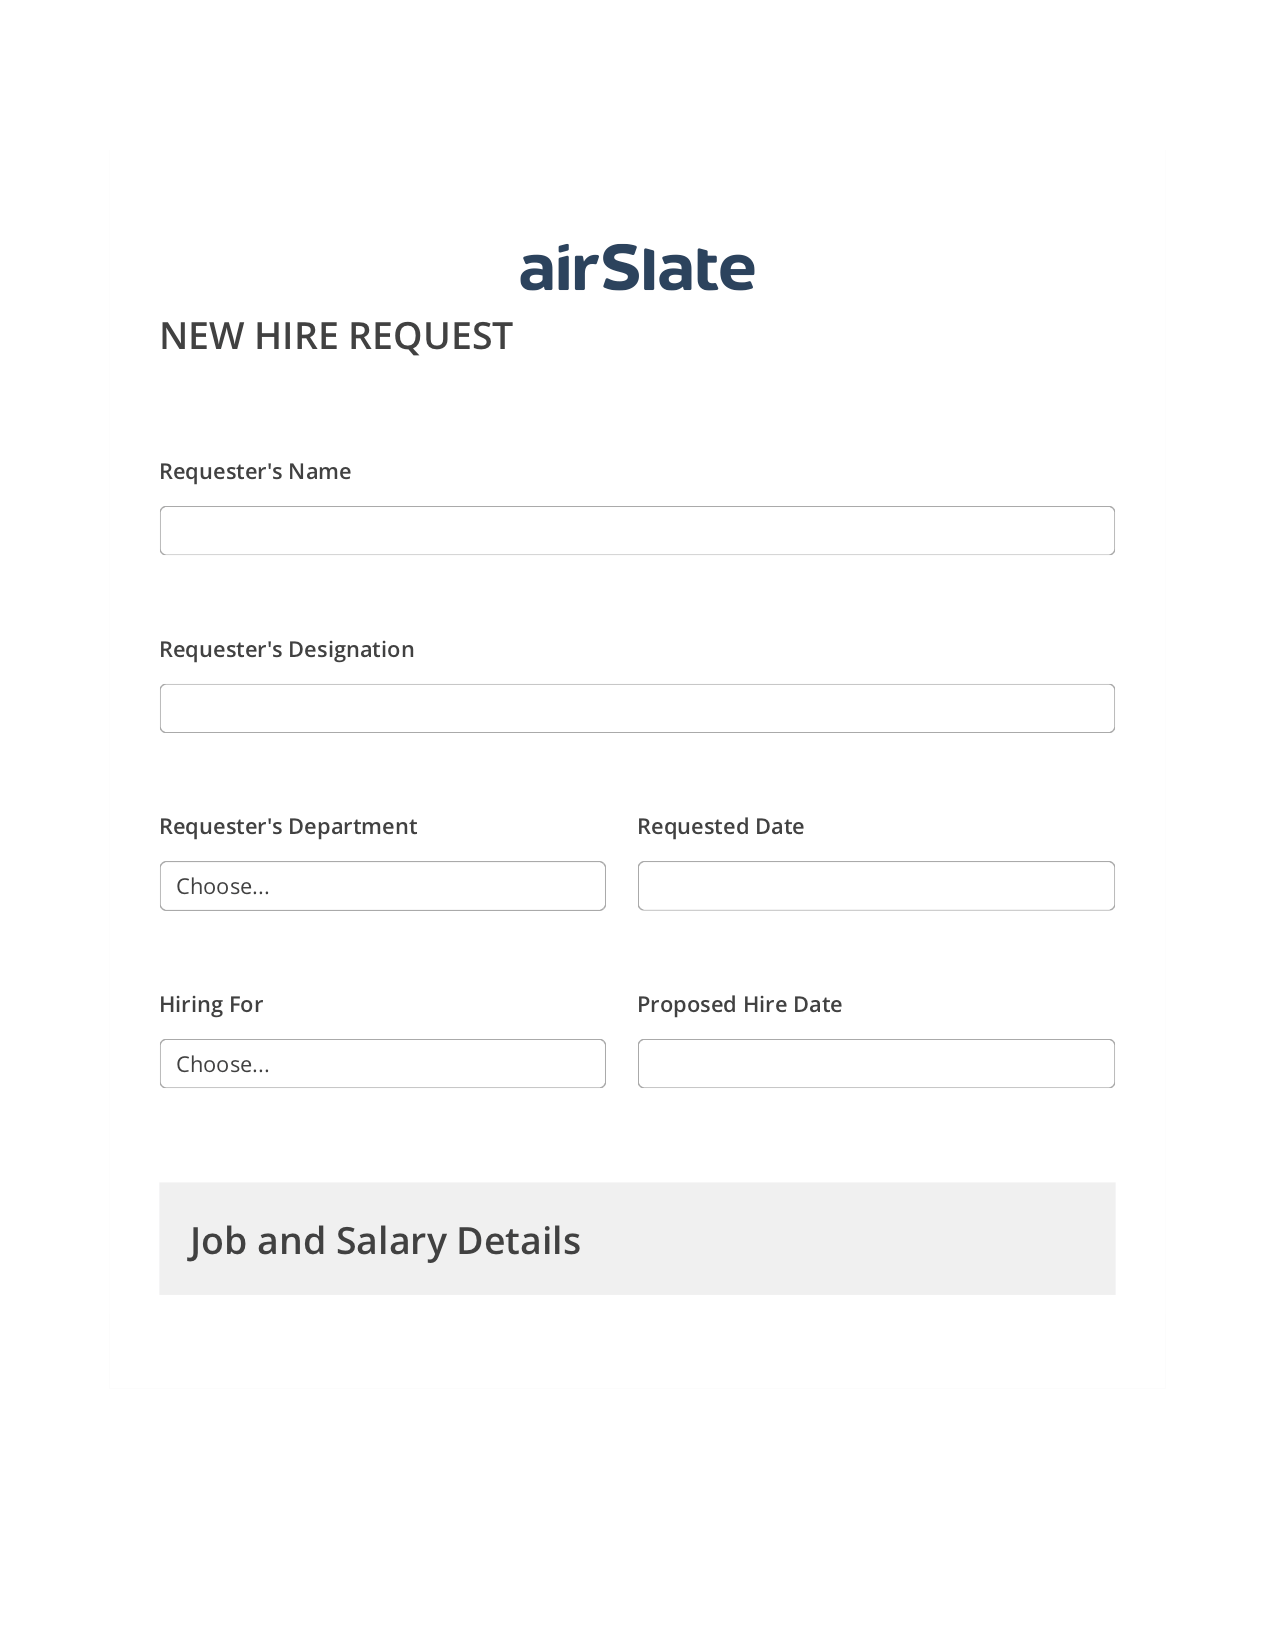 Hiring Request Workflow Pre-fill from Excel Spreadsheet Bot, Lock the Slate Bot, Slack Notification Postfinish Bot